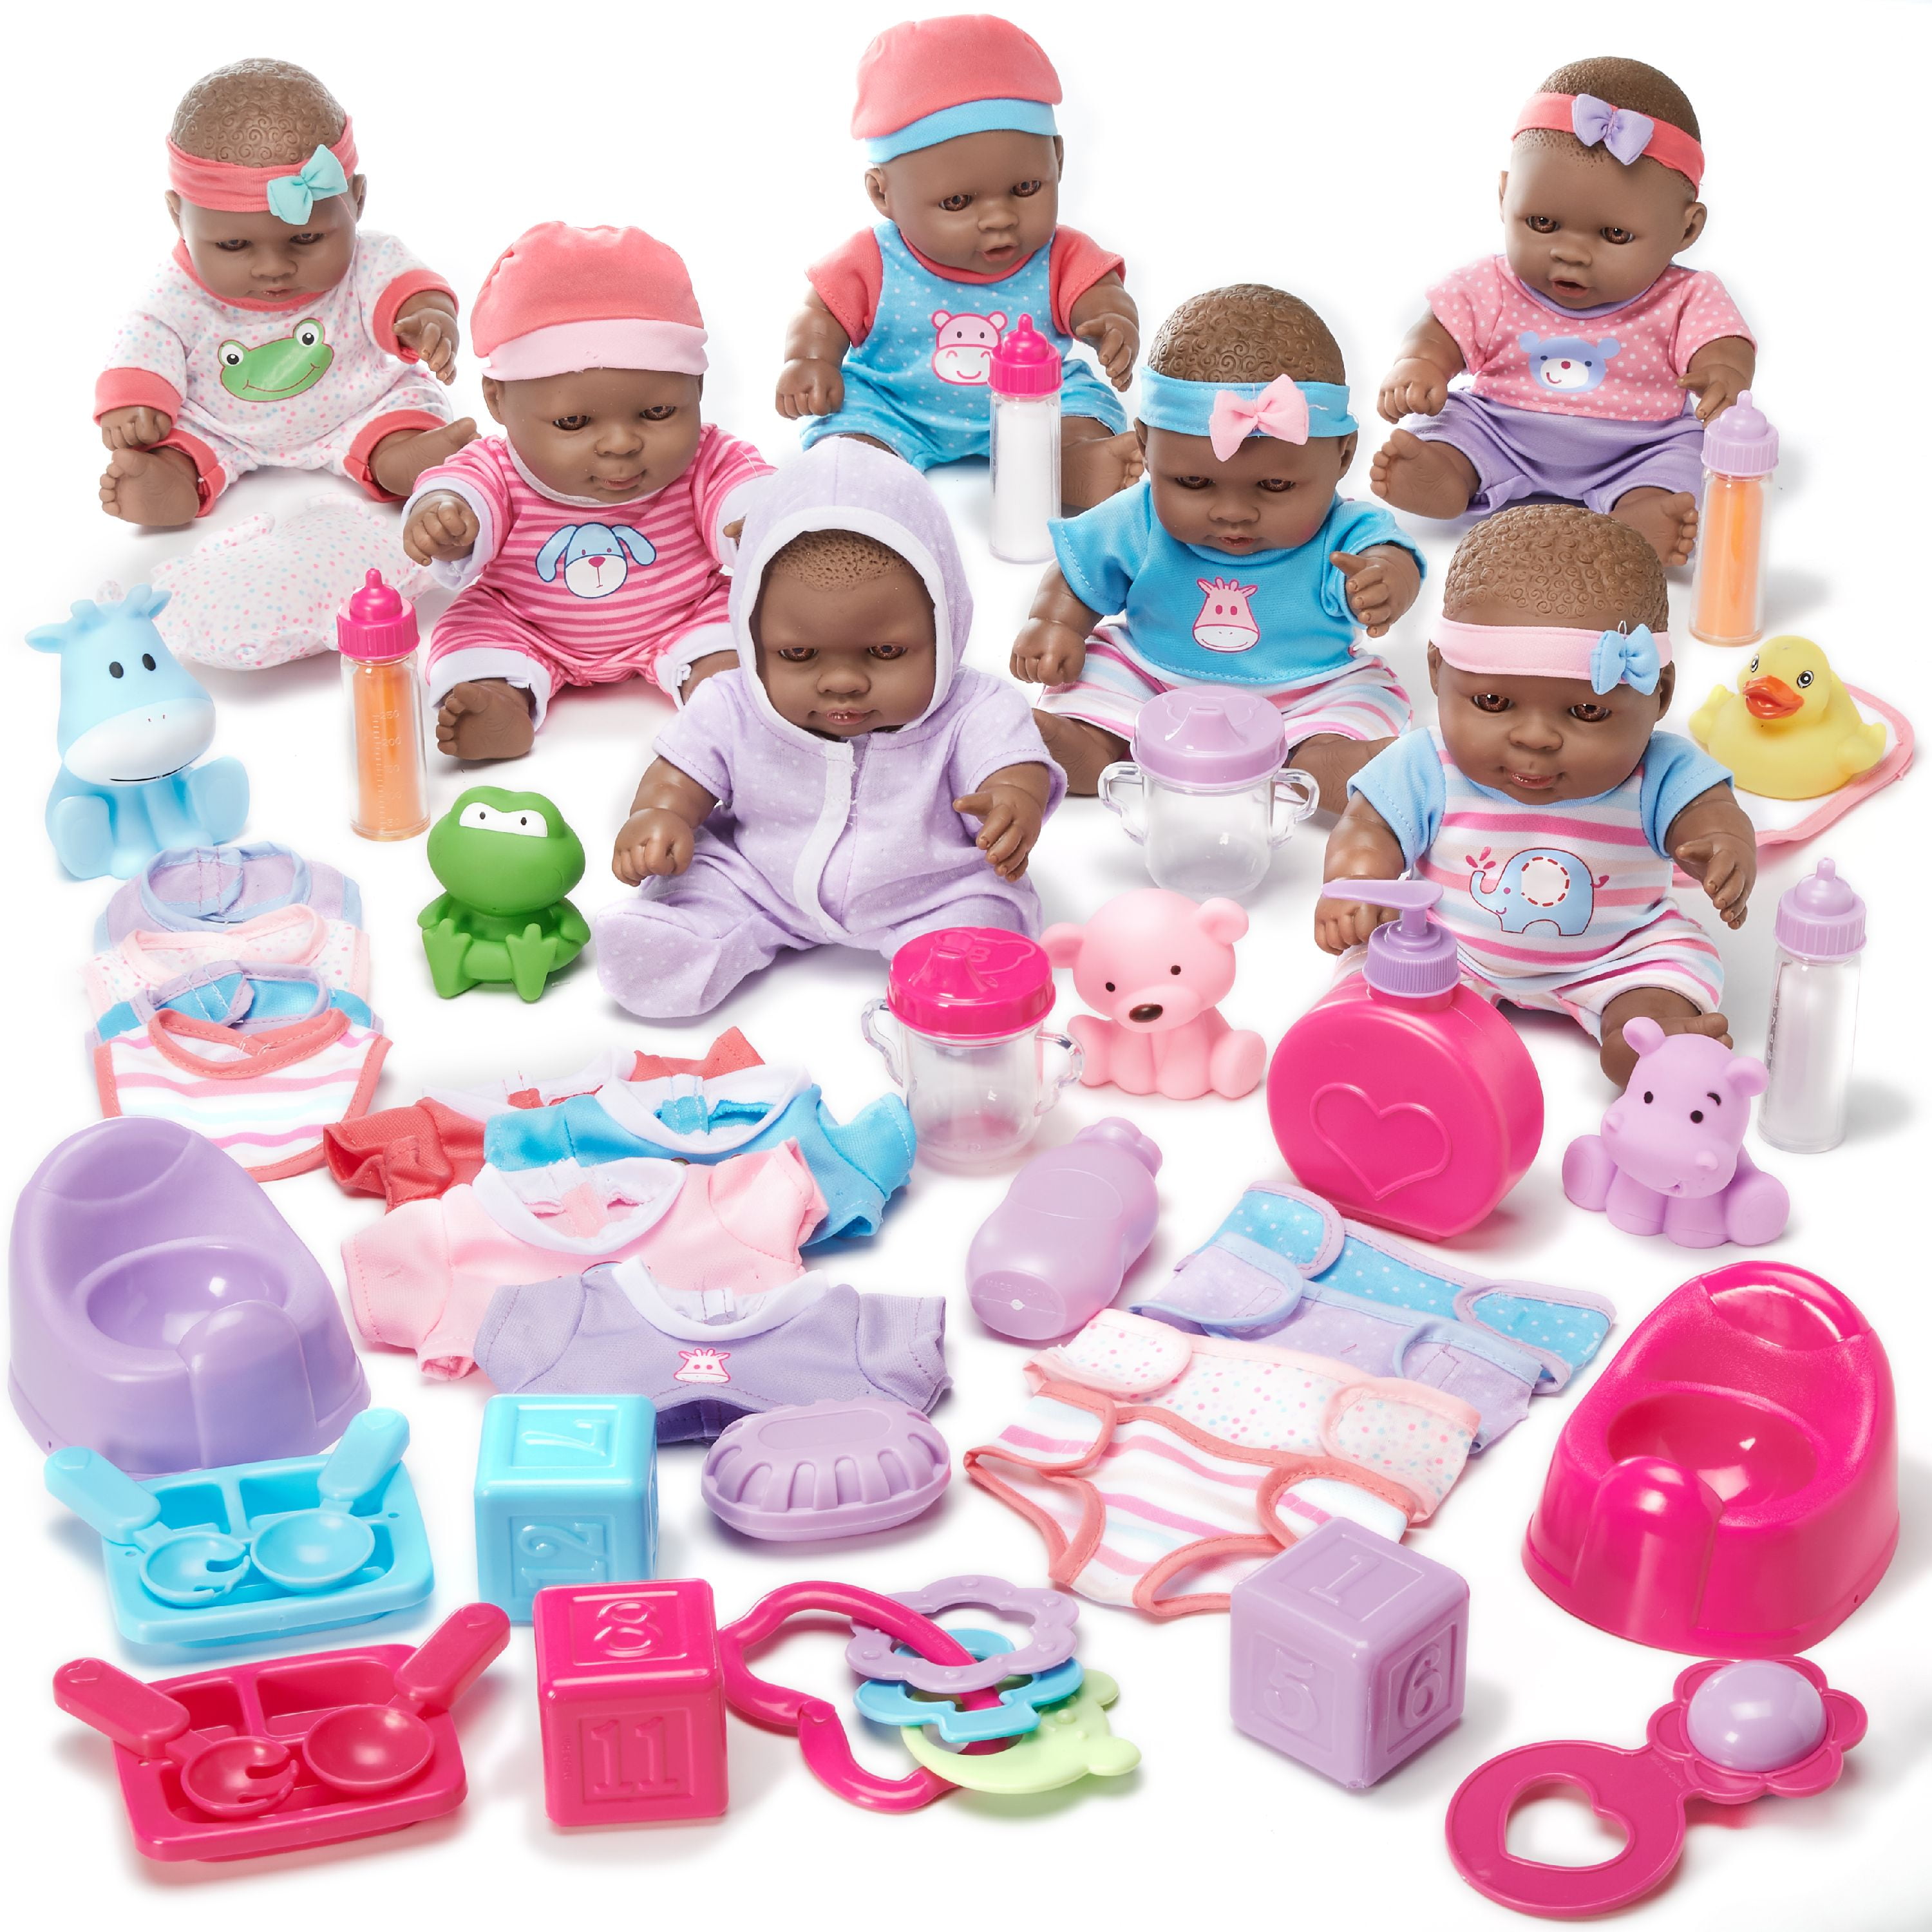 kid connection doll set